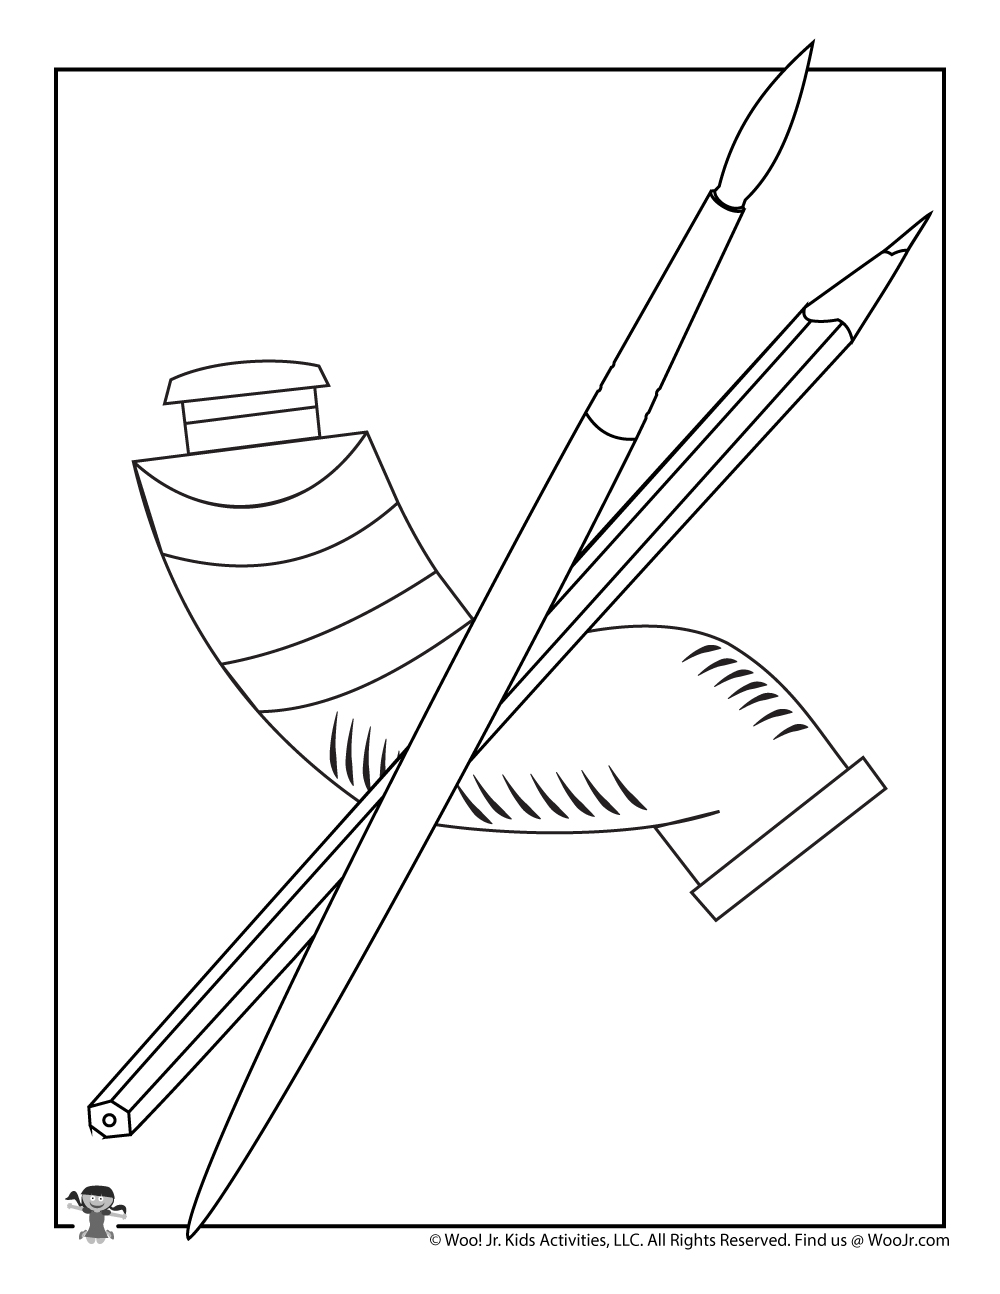 Printable art coloring pages woo jr kids activities childrens publishing